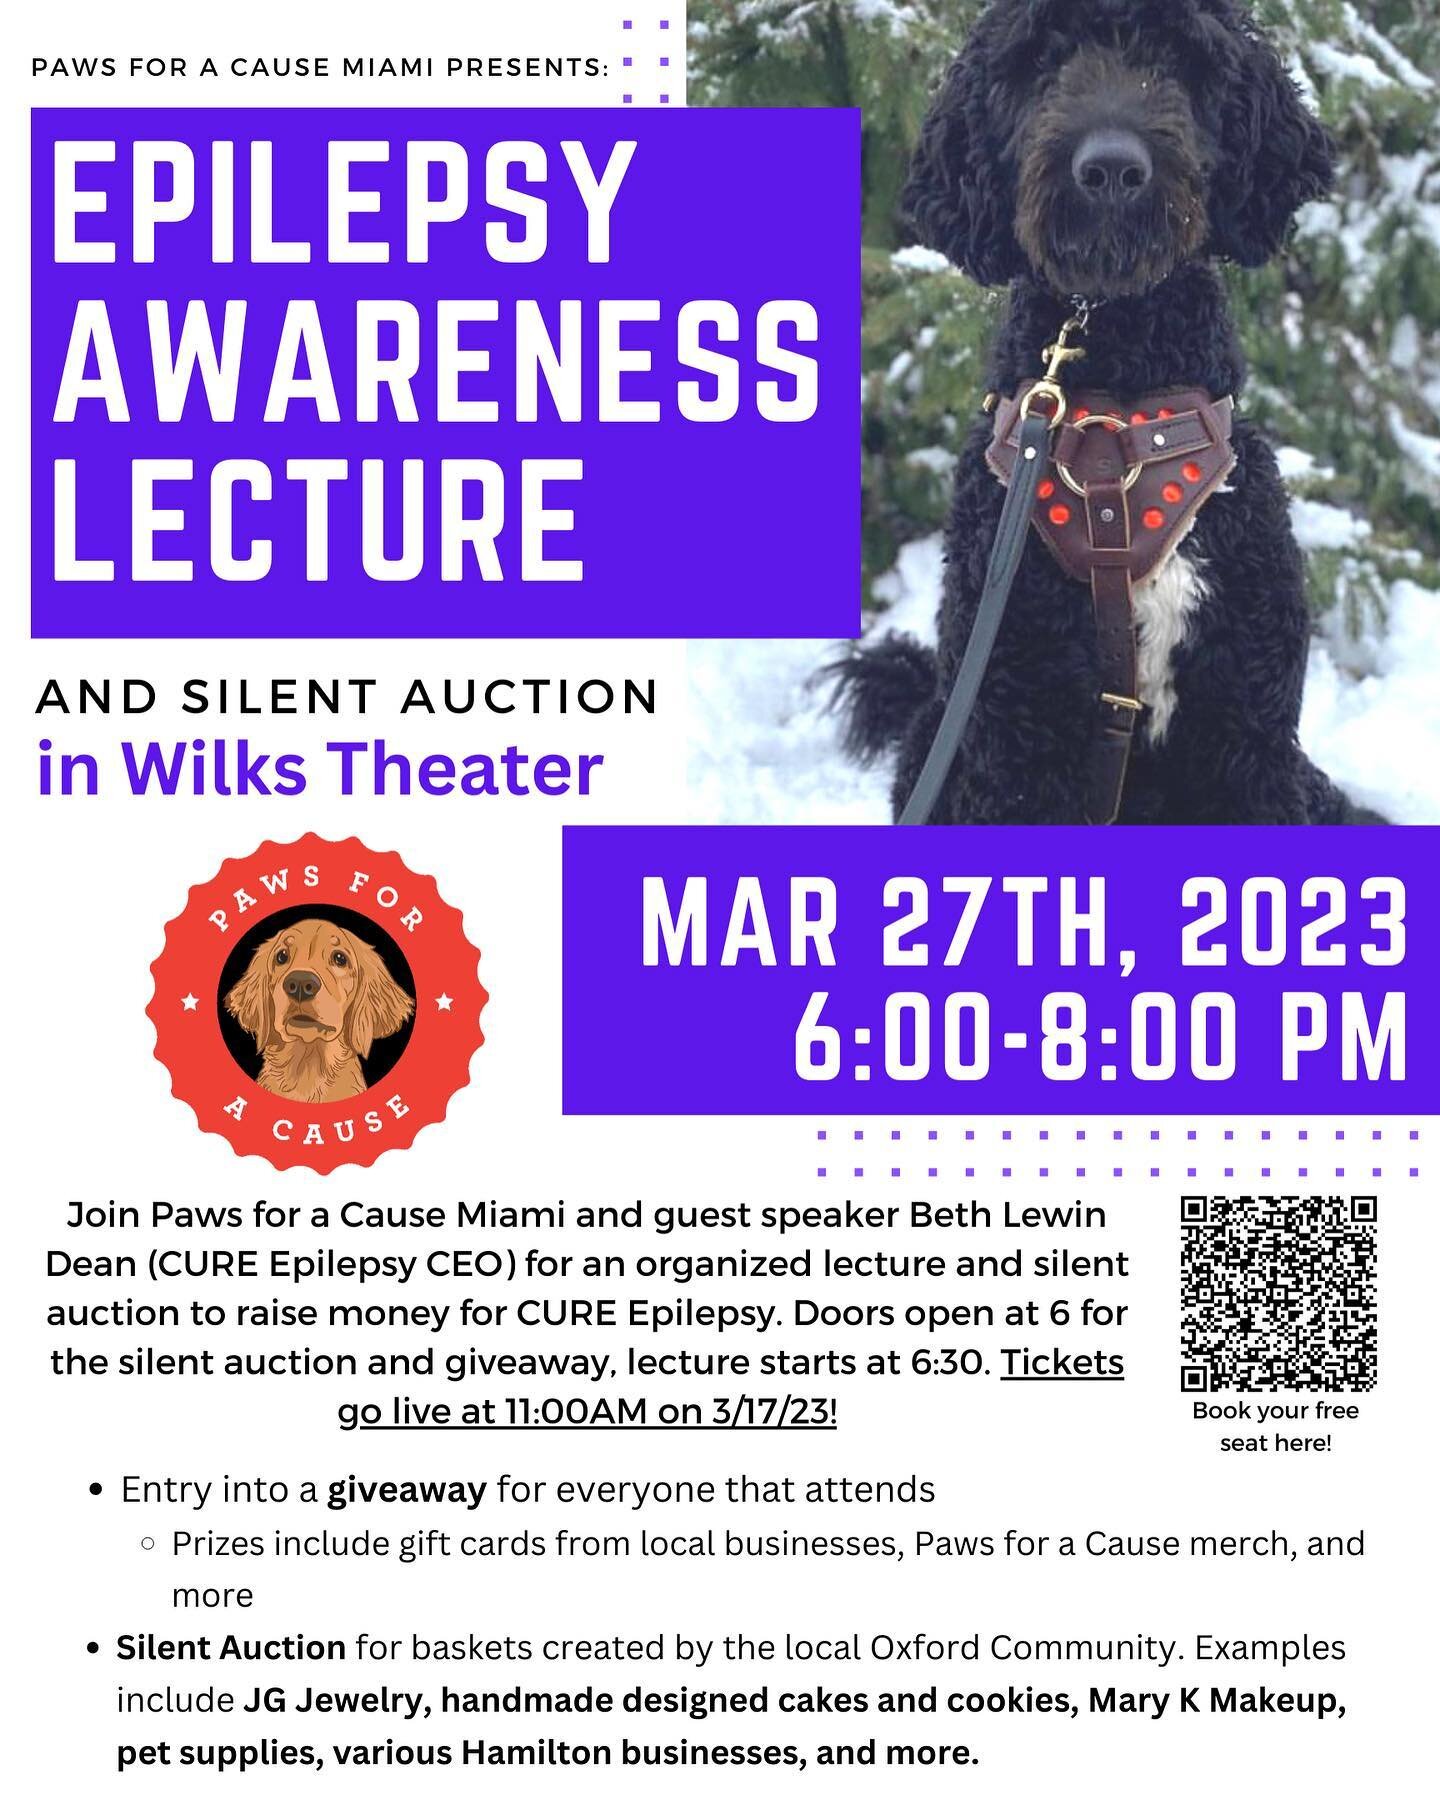 Tickets are live for our epilepsy awareness event! Scan the QR code to get your free ticket and get entered into our giveaway at the event! (Only people who are in person can participate). Also consider donating through the link in our bio! We hope t